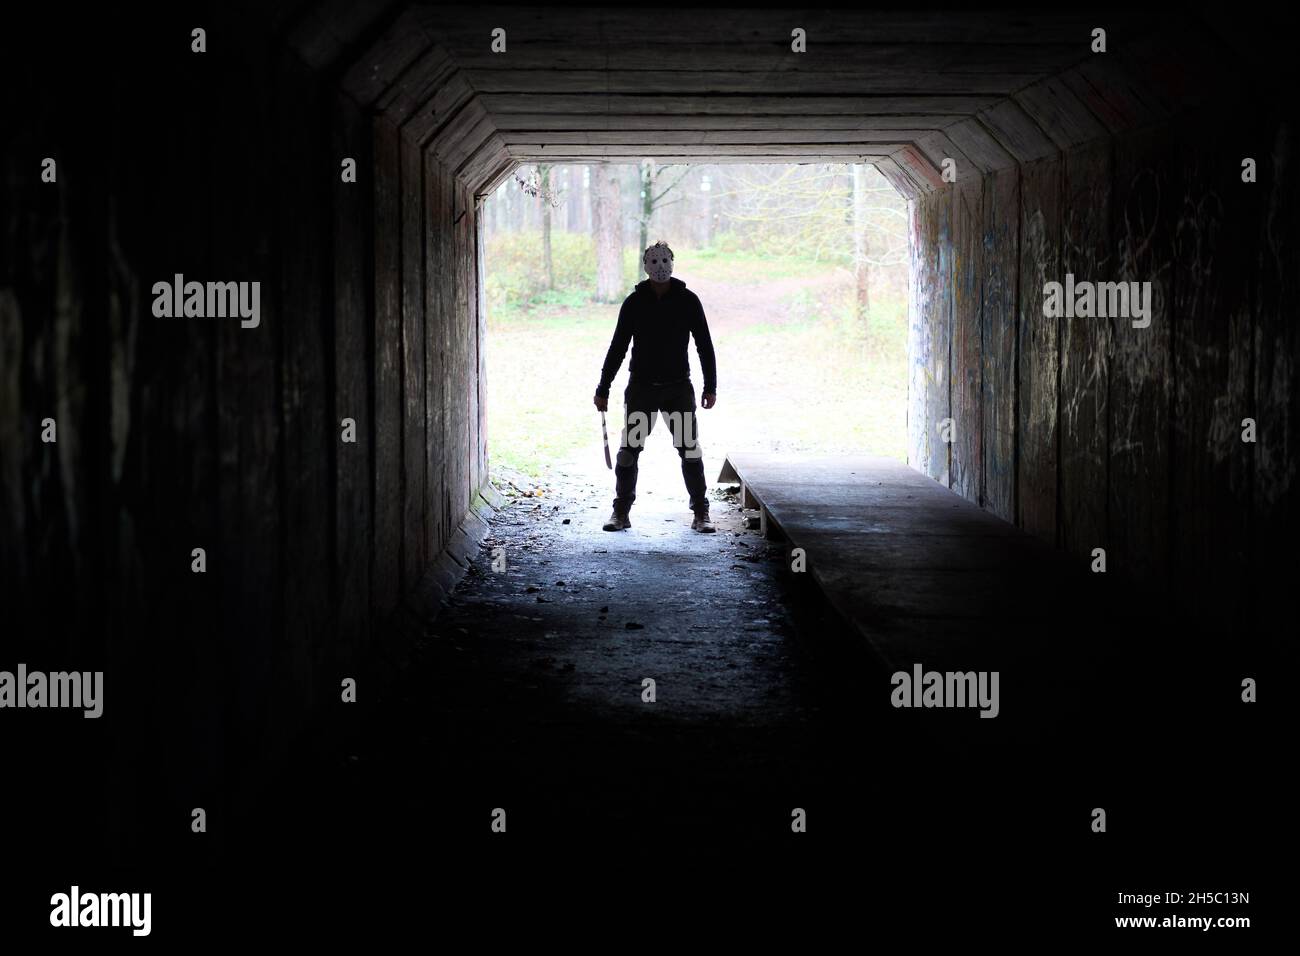 Serial killer Jason Voorhees in hockey mask and machete in the end of the dark tunnel. Friday 13h cosplay costume.  Stock Photo